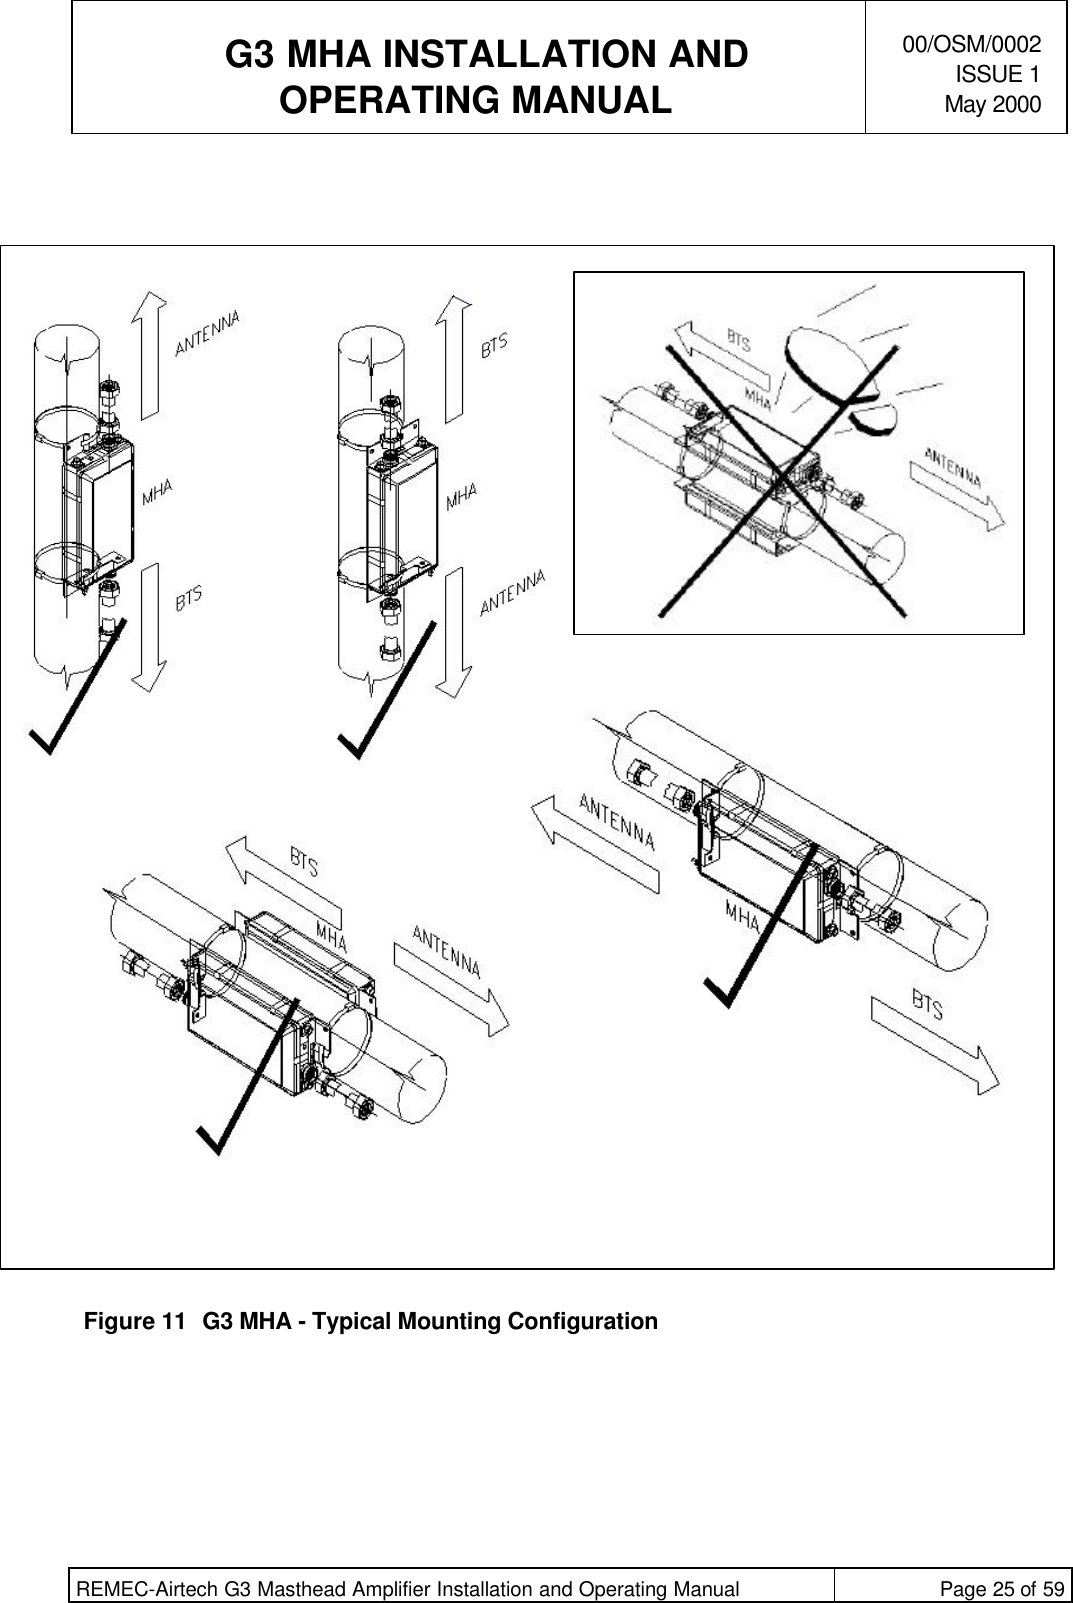   G3 MHA INSTALLATION ANDOPERATING MANUAL00/OSM/0002ISSUE 1May 2000REMEC-Airtech G3 Masthead Amplifier Installation and Operating Manual Page 25 of 59Figure 11 G3 MHA - Typical Mounting Configuration